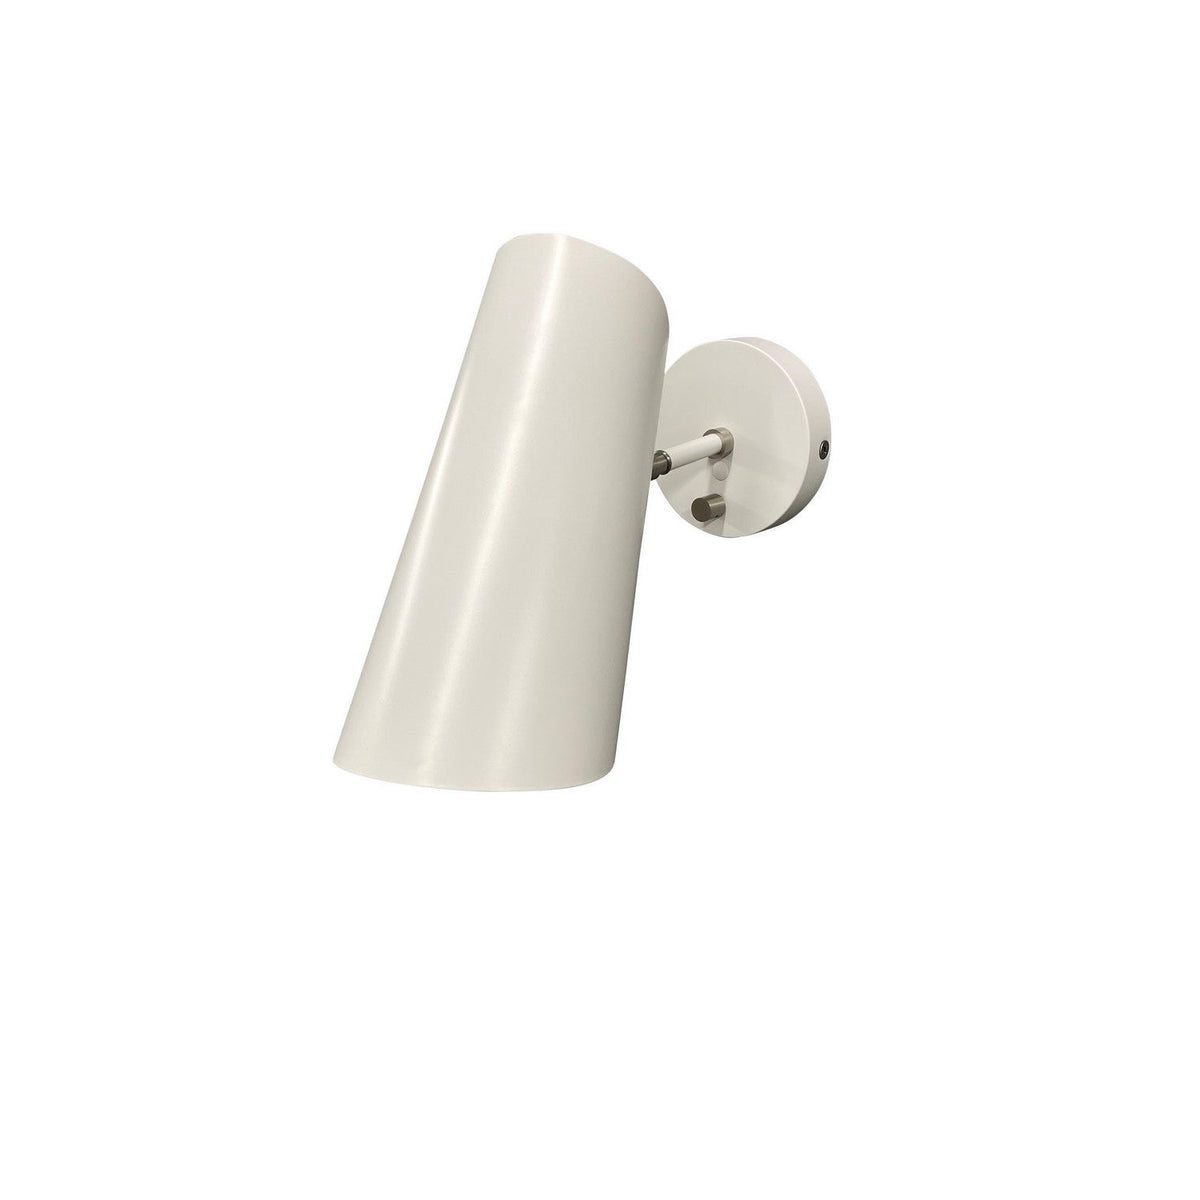 House of Troy - L325-WTSN - LED Wall Sconce - Logan - White/Satin Nickel